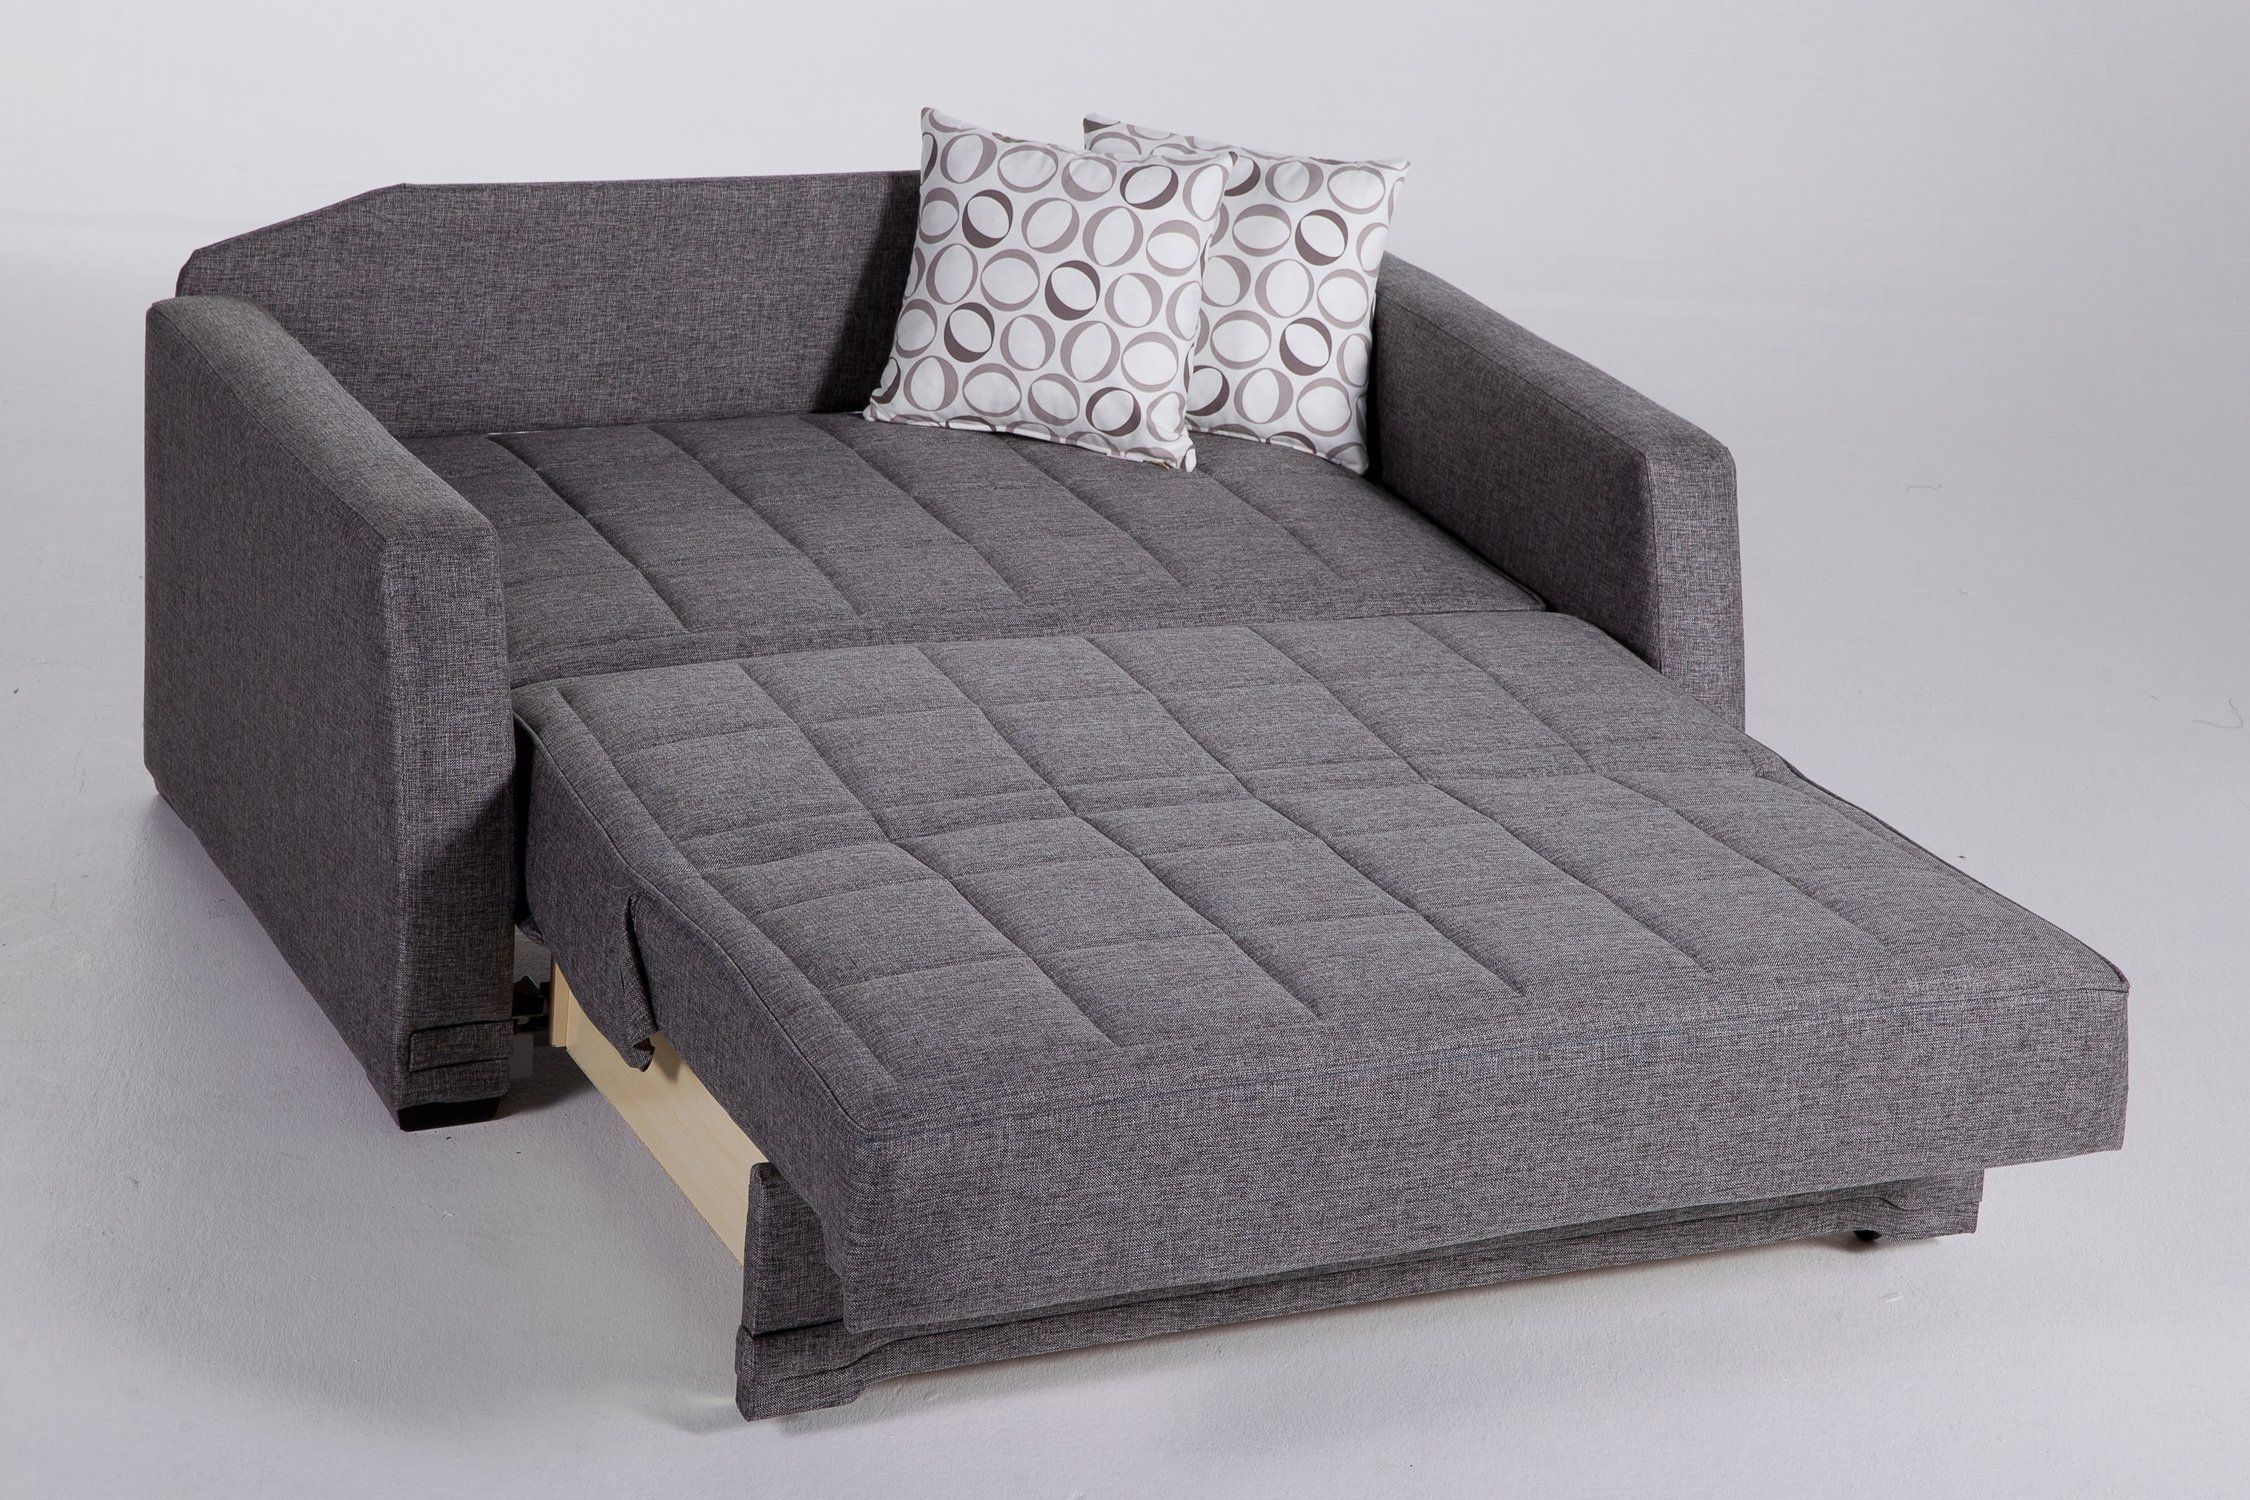 Valerie Diego Gray Loveseat Sleeperistikbal Furniture Inside Twin Nancy Sectional Sofa Beds With Storage (View 14 of 15)